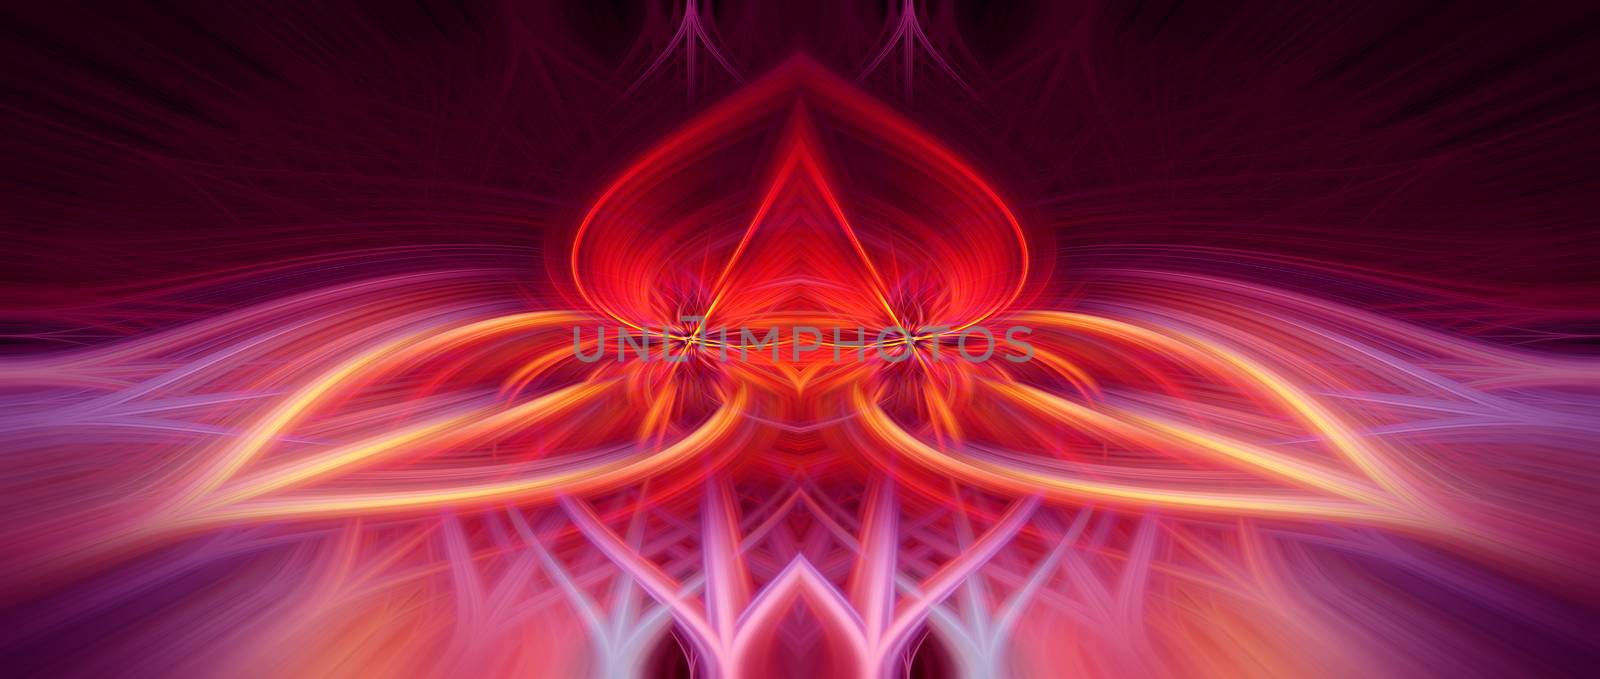 Beautiful abstract intertwined symmetrical 3d fibers forming a shape of sparkle, flame, flower, interlinked hearts, alien creature. Pink, red, maroon, orange, and purple colors. Illustration.